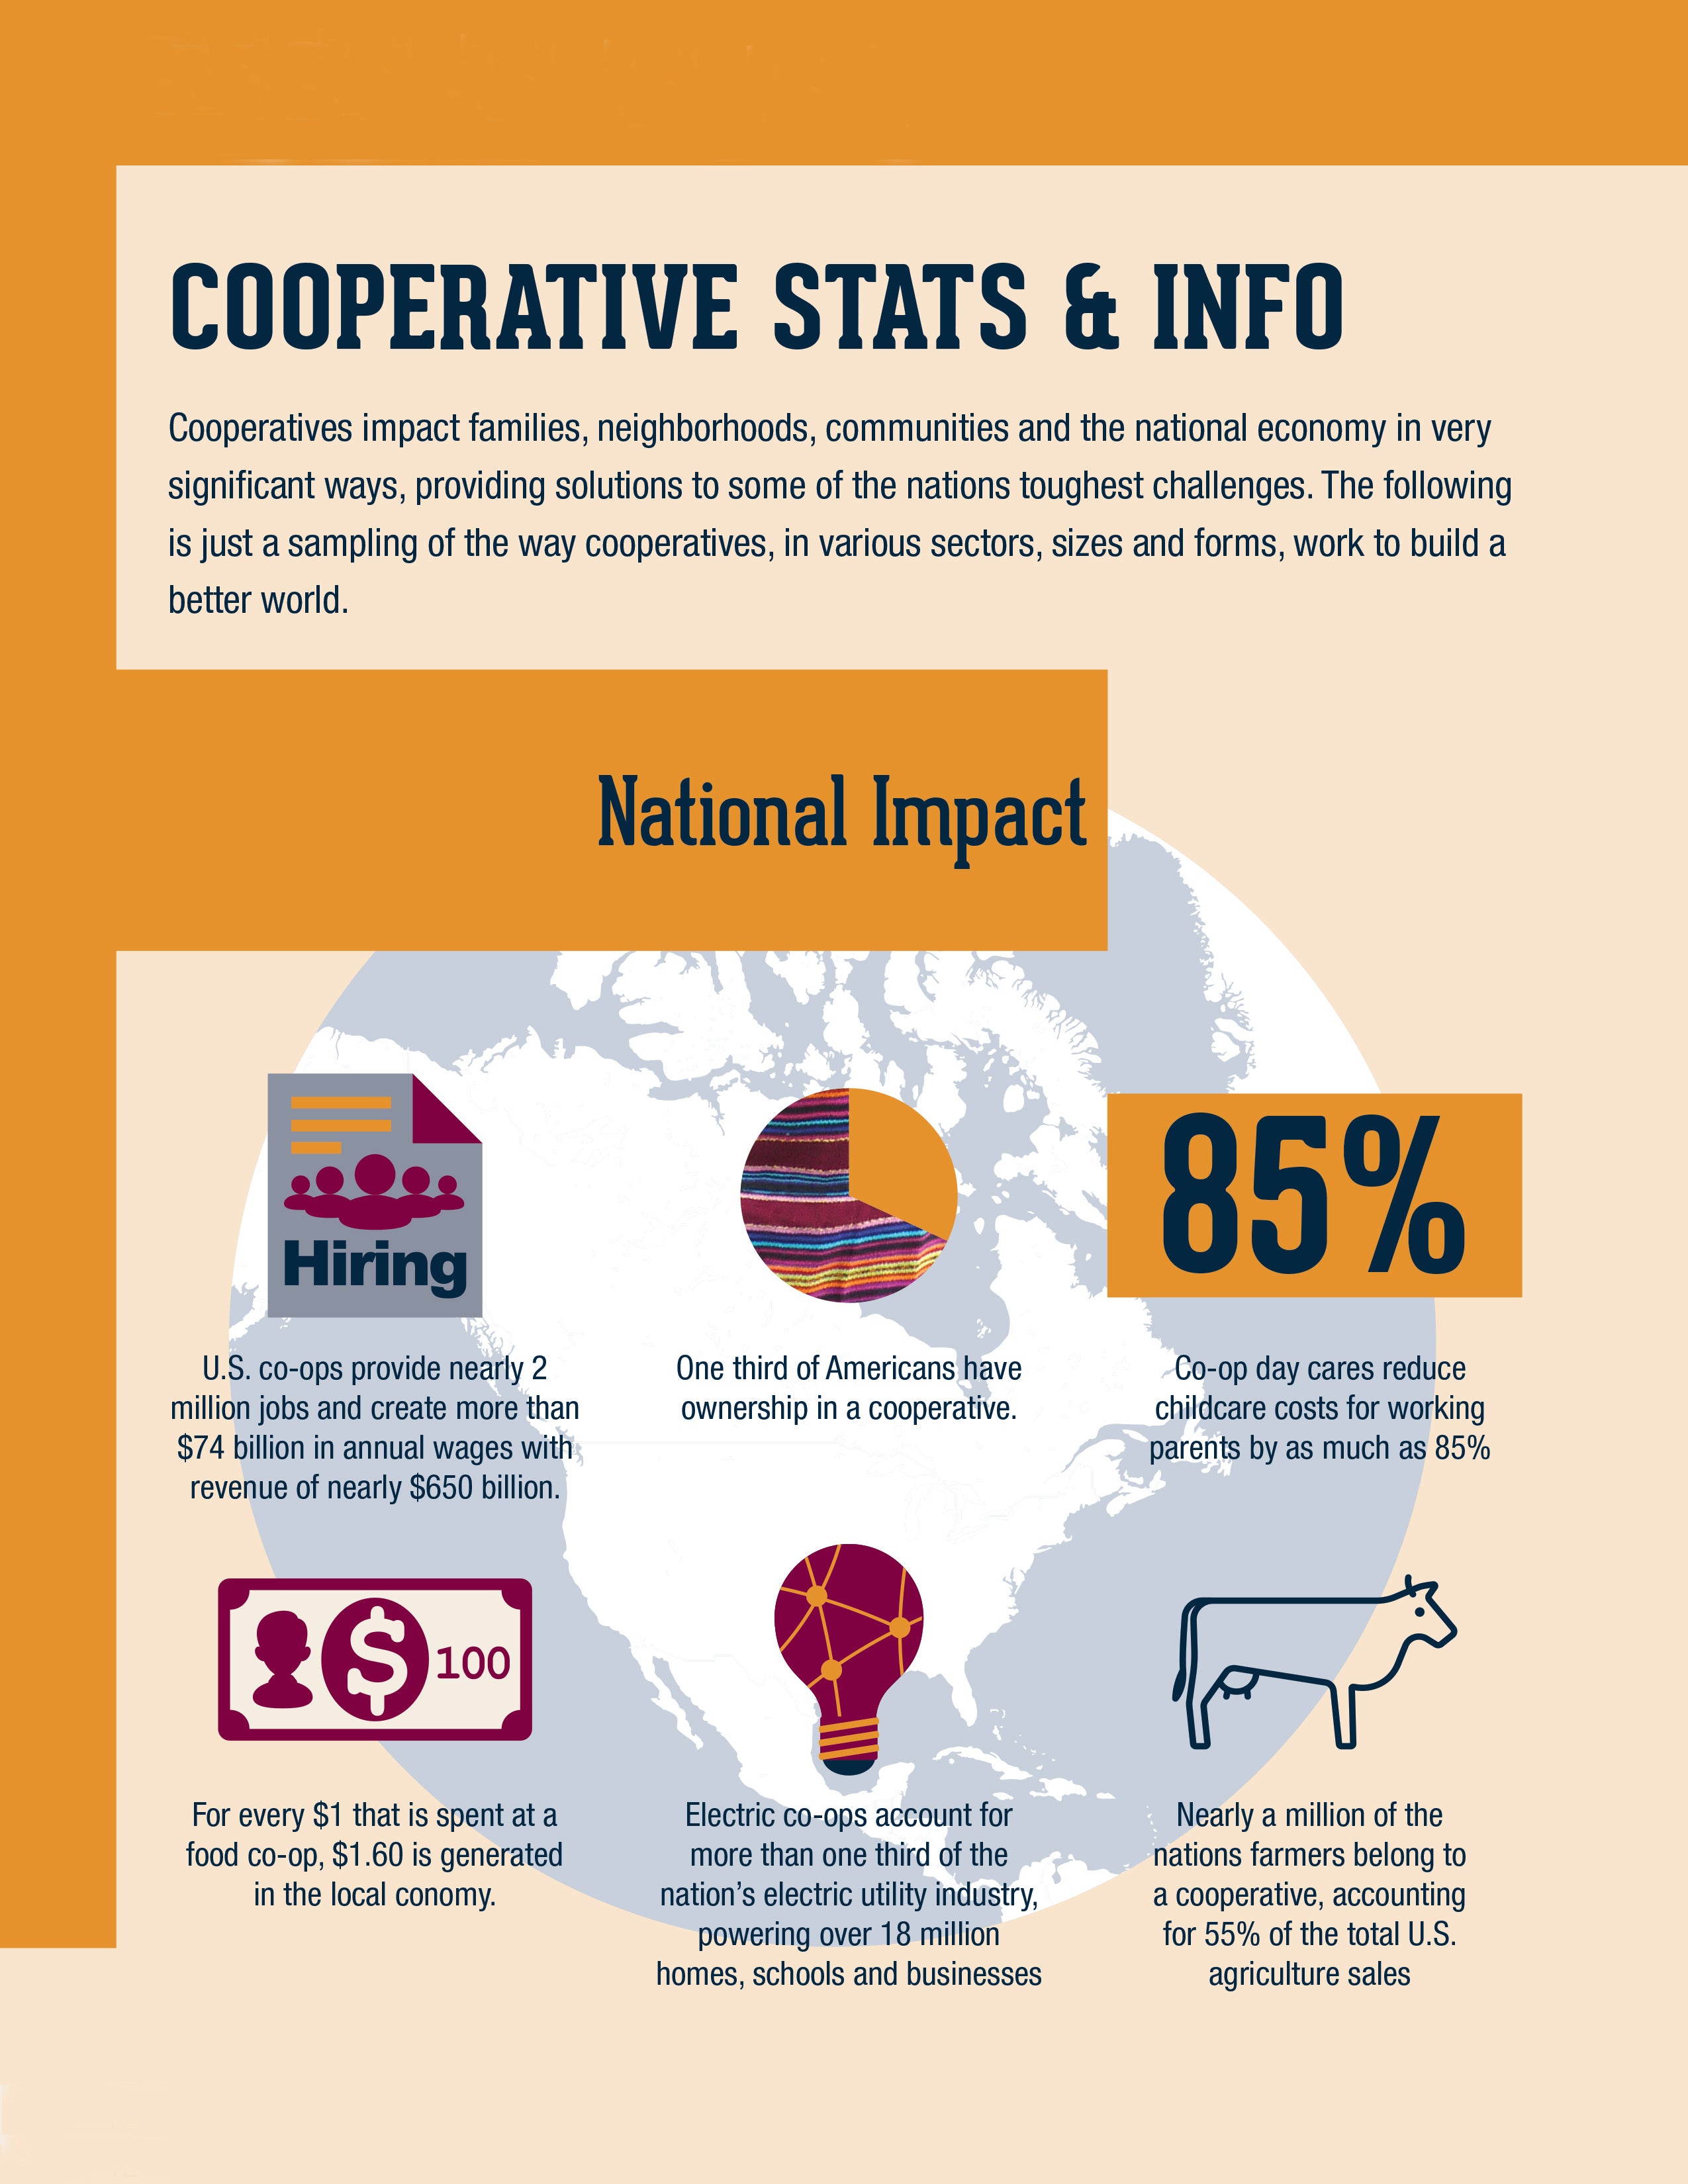 Statistics about cooperatives in general